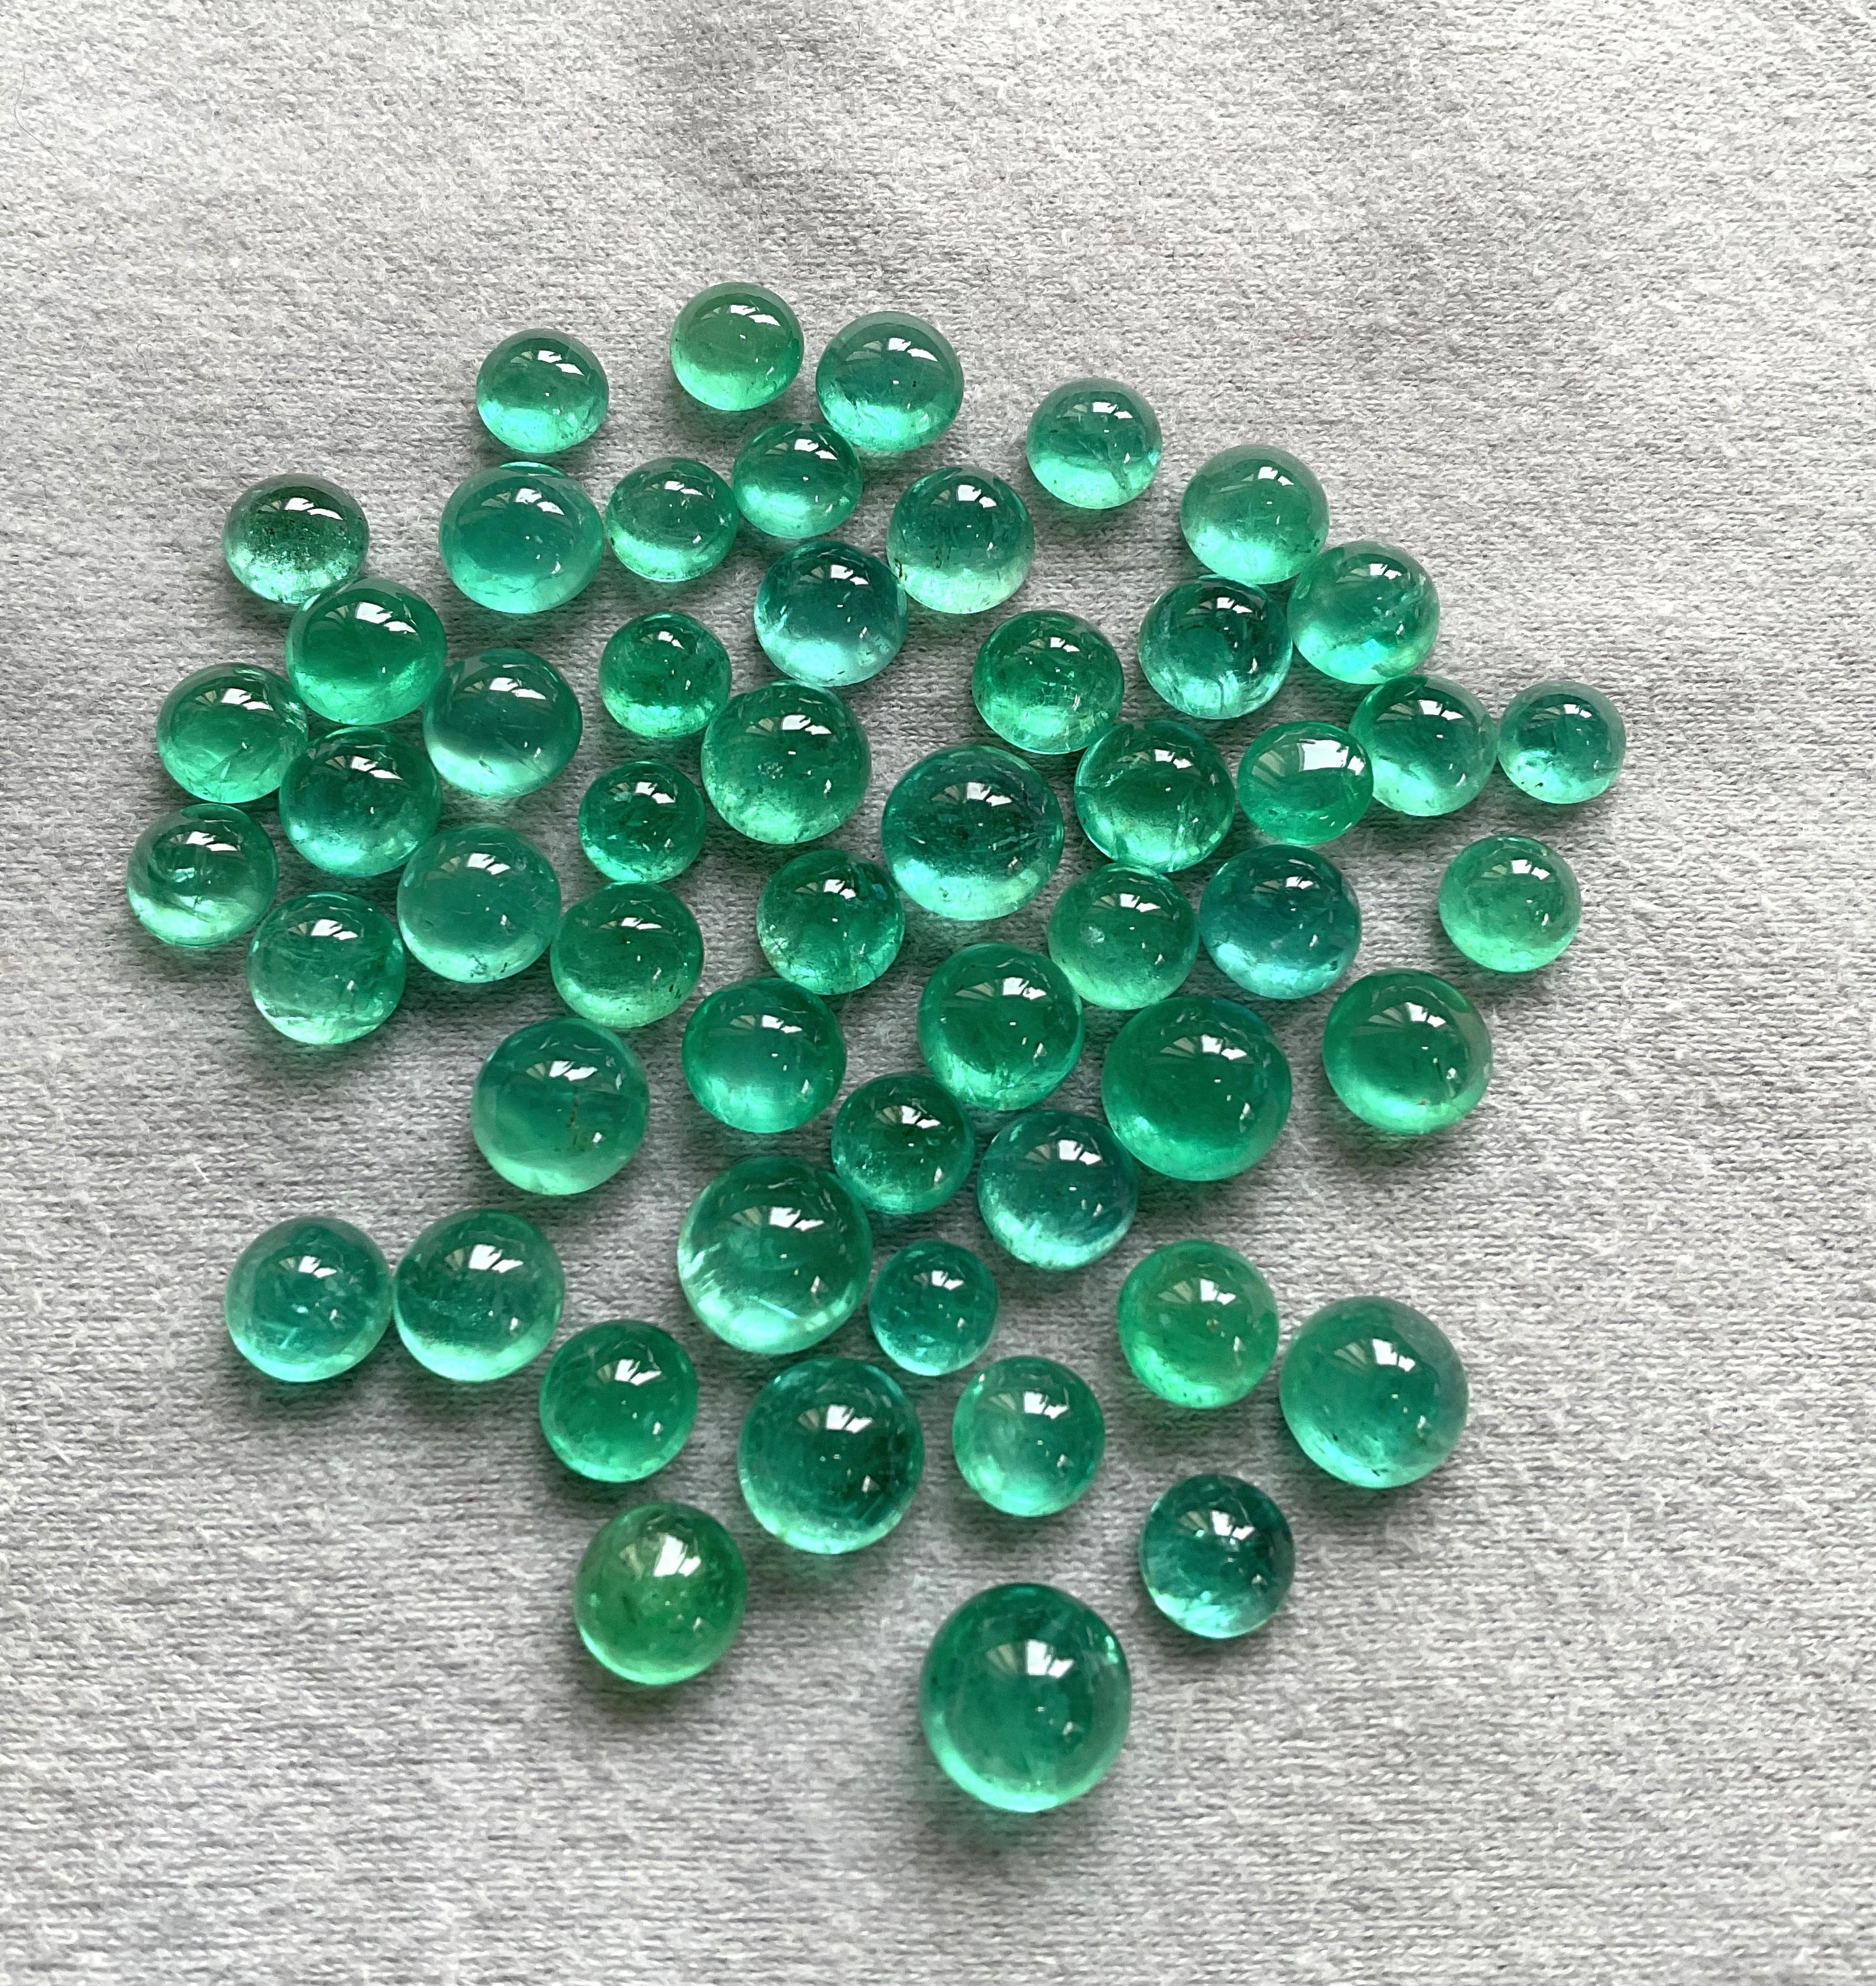 111.00 carats Zambian Emerald Round Plain Cabs Top Quality For Jewelry Gemstone 

Gemstone: Emerald
Shape: Round Cabs
weight: 111.00 carats
Size - 6 To 9 MM
Quantity - 53 piece